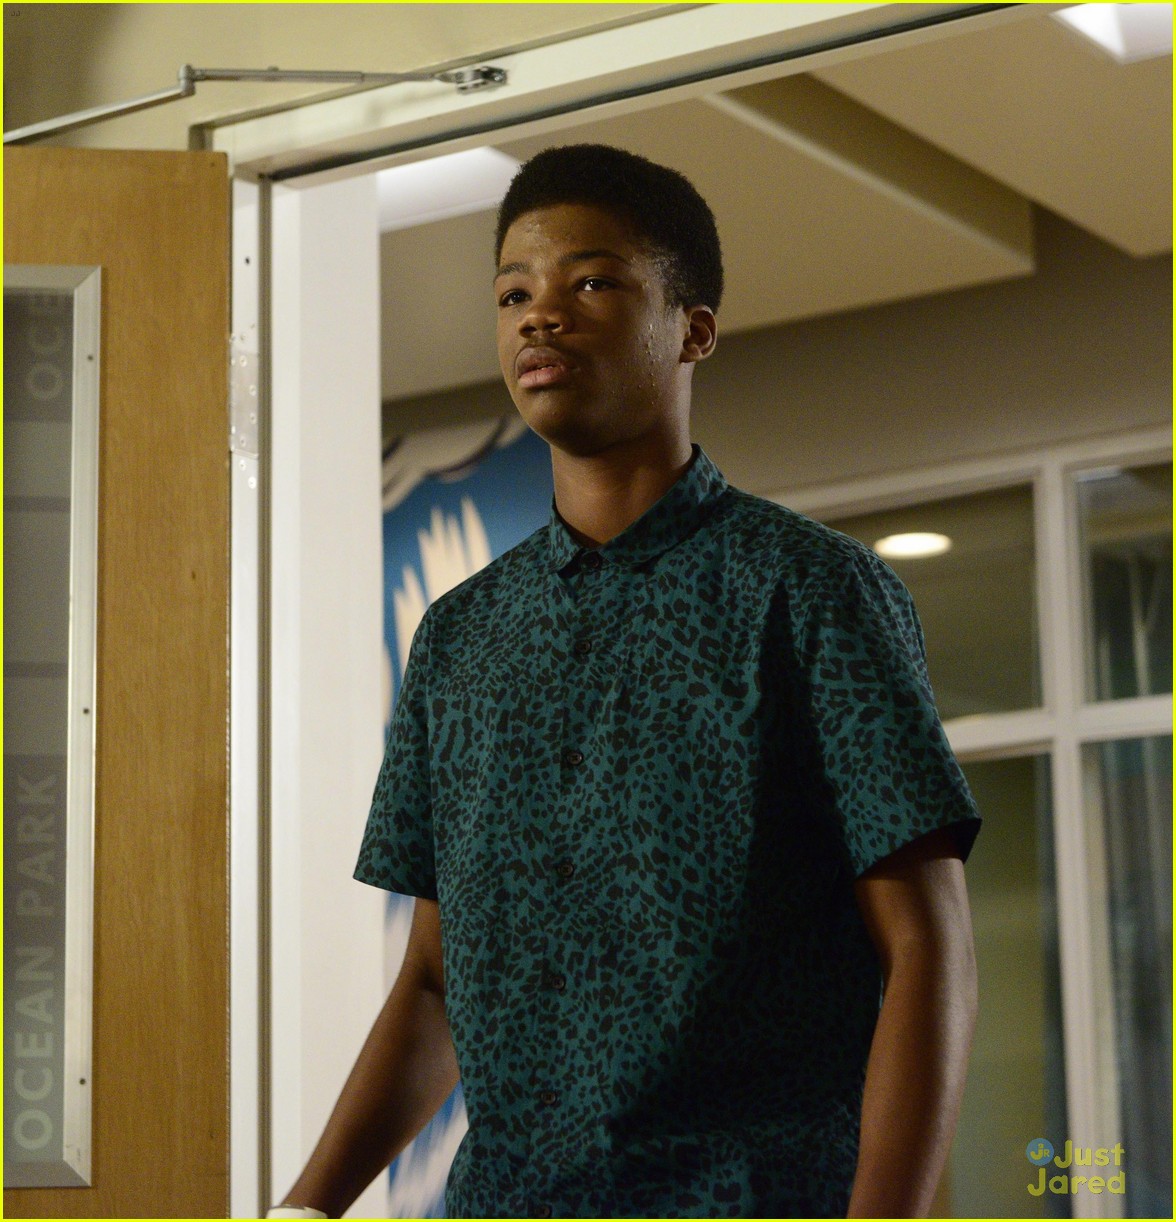 red band society fall finale stills 01